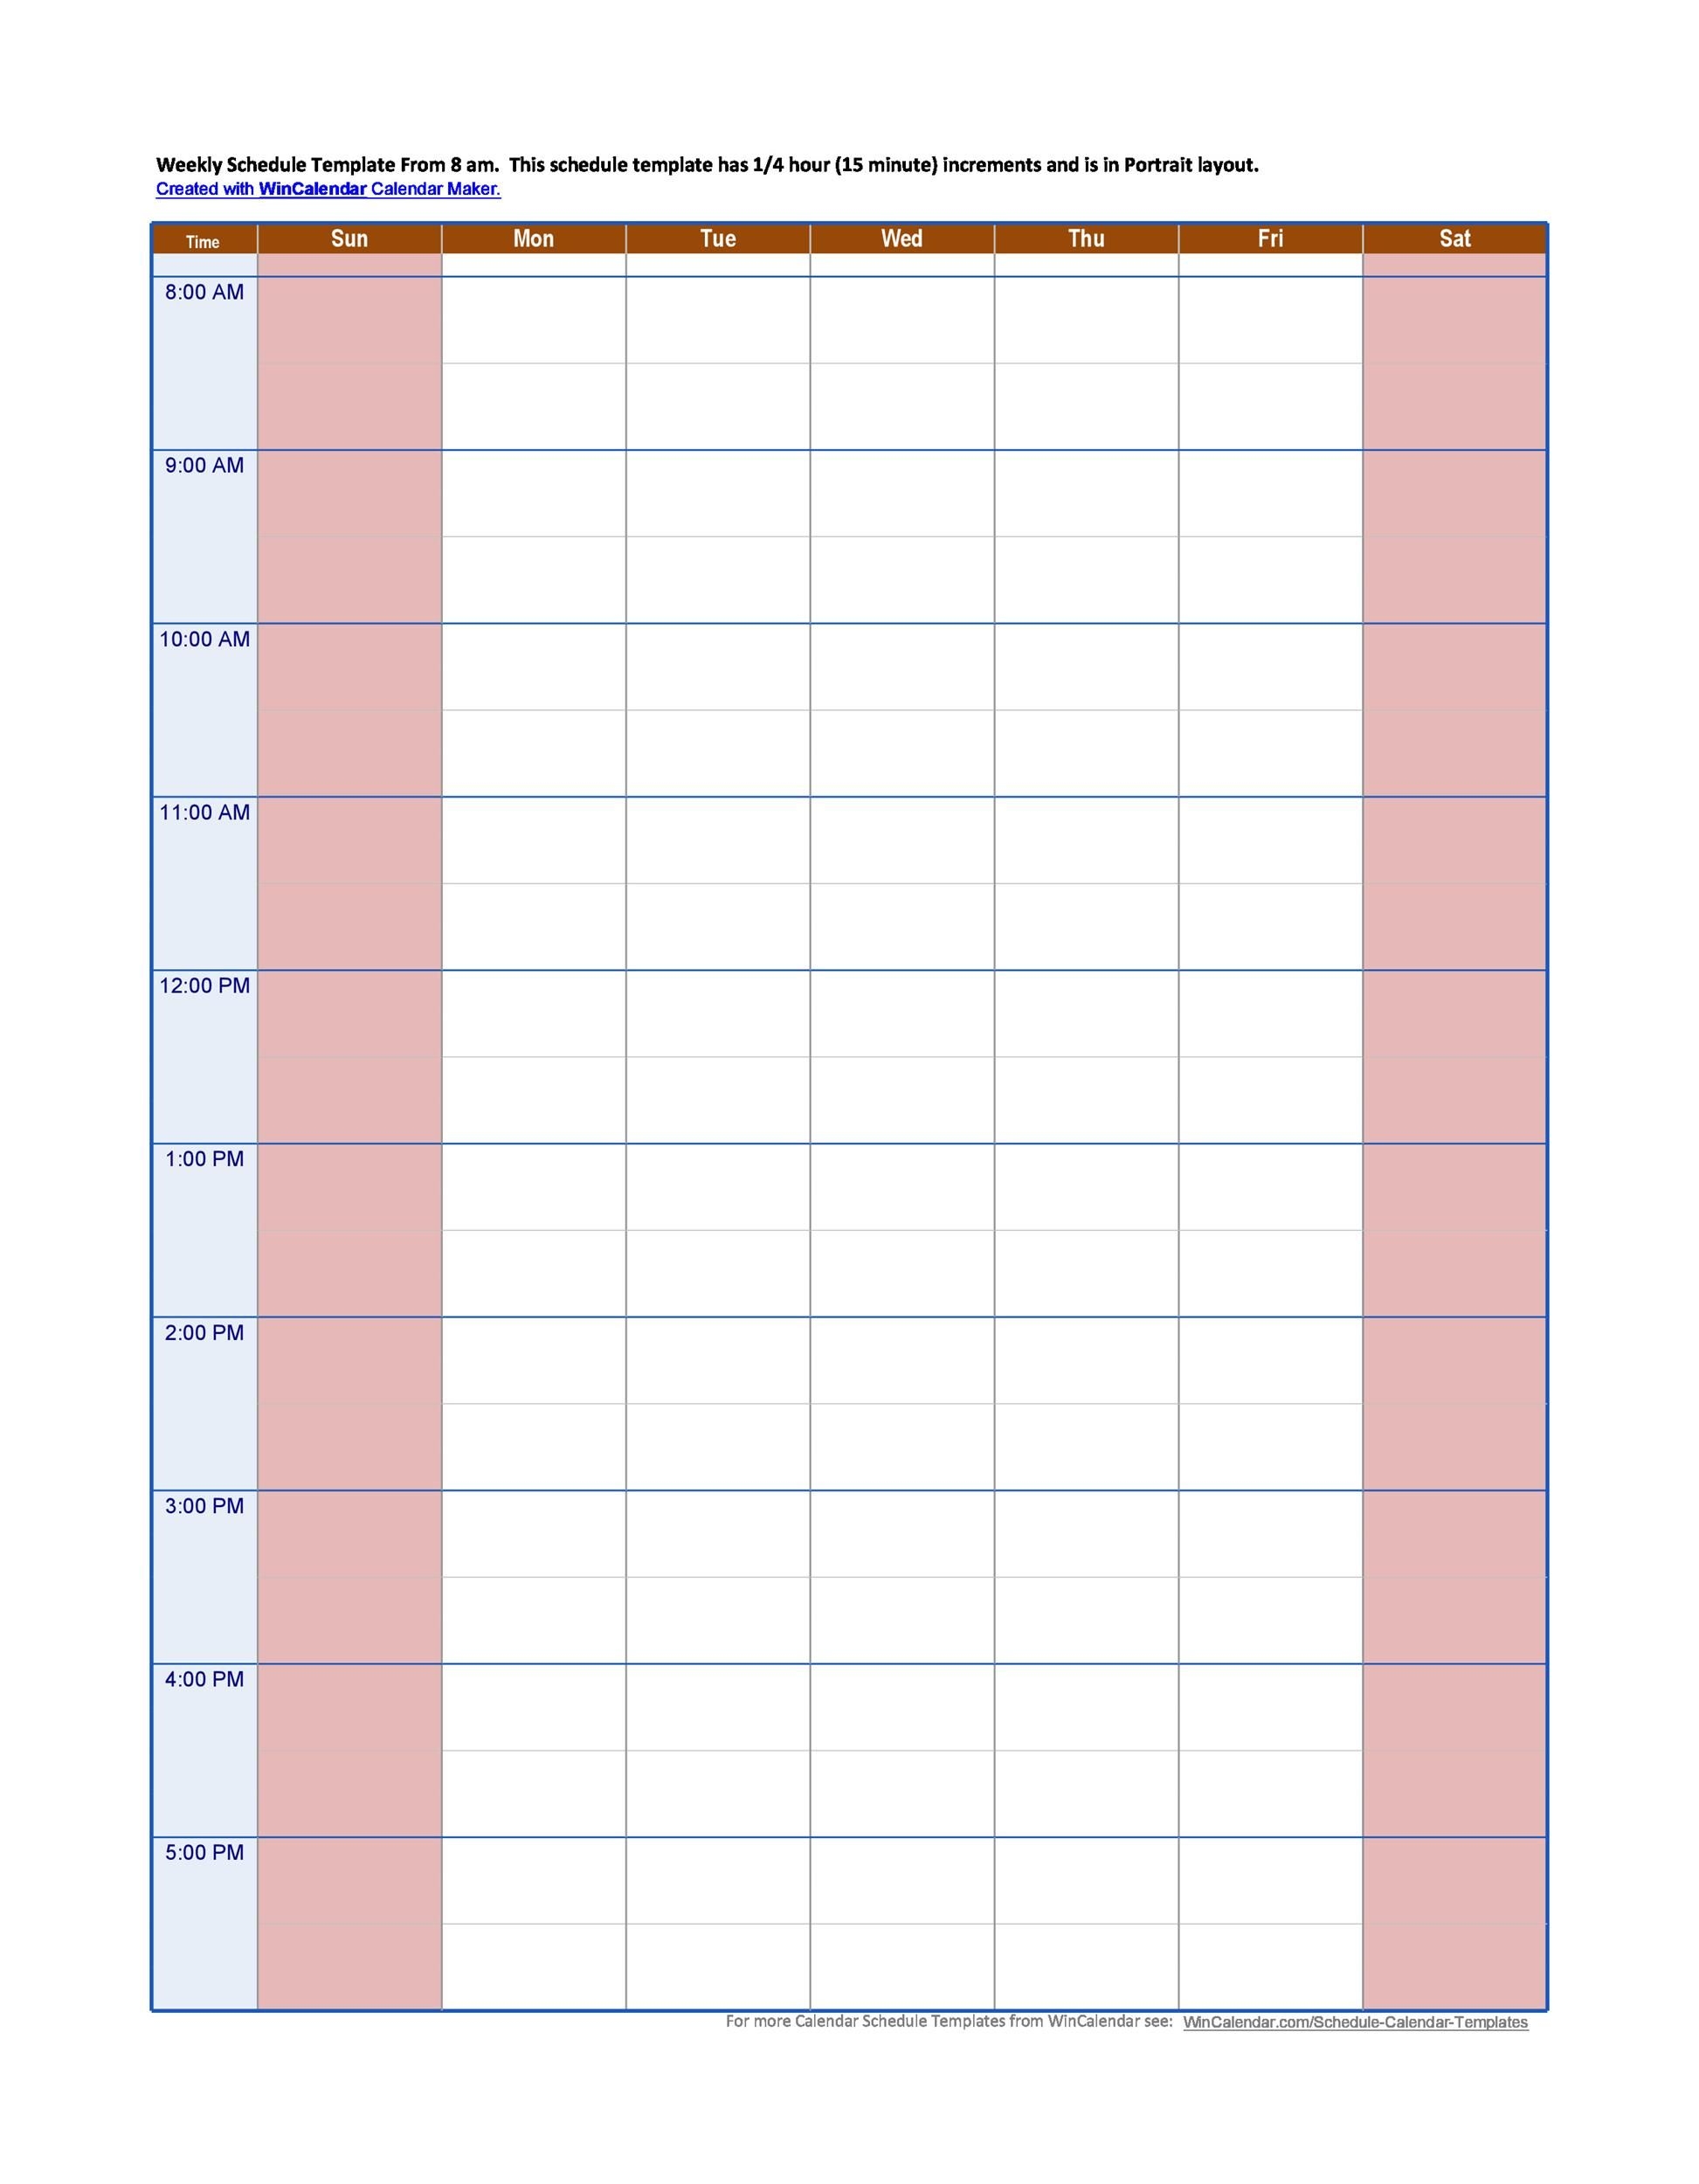 How to Monthly Calendar With Hourly Time Slots Get Your